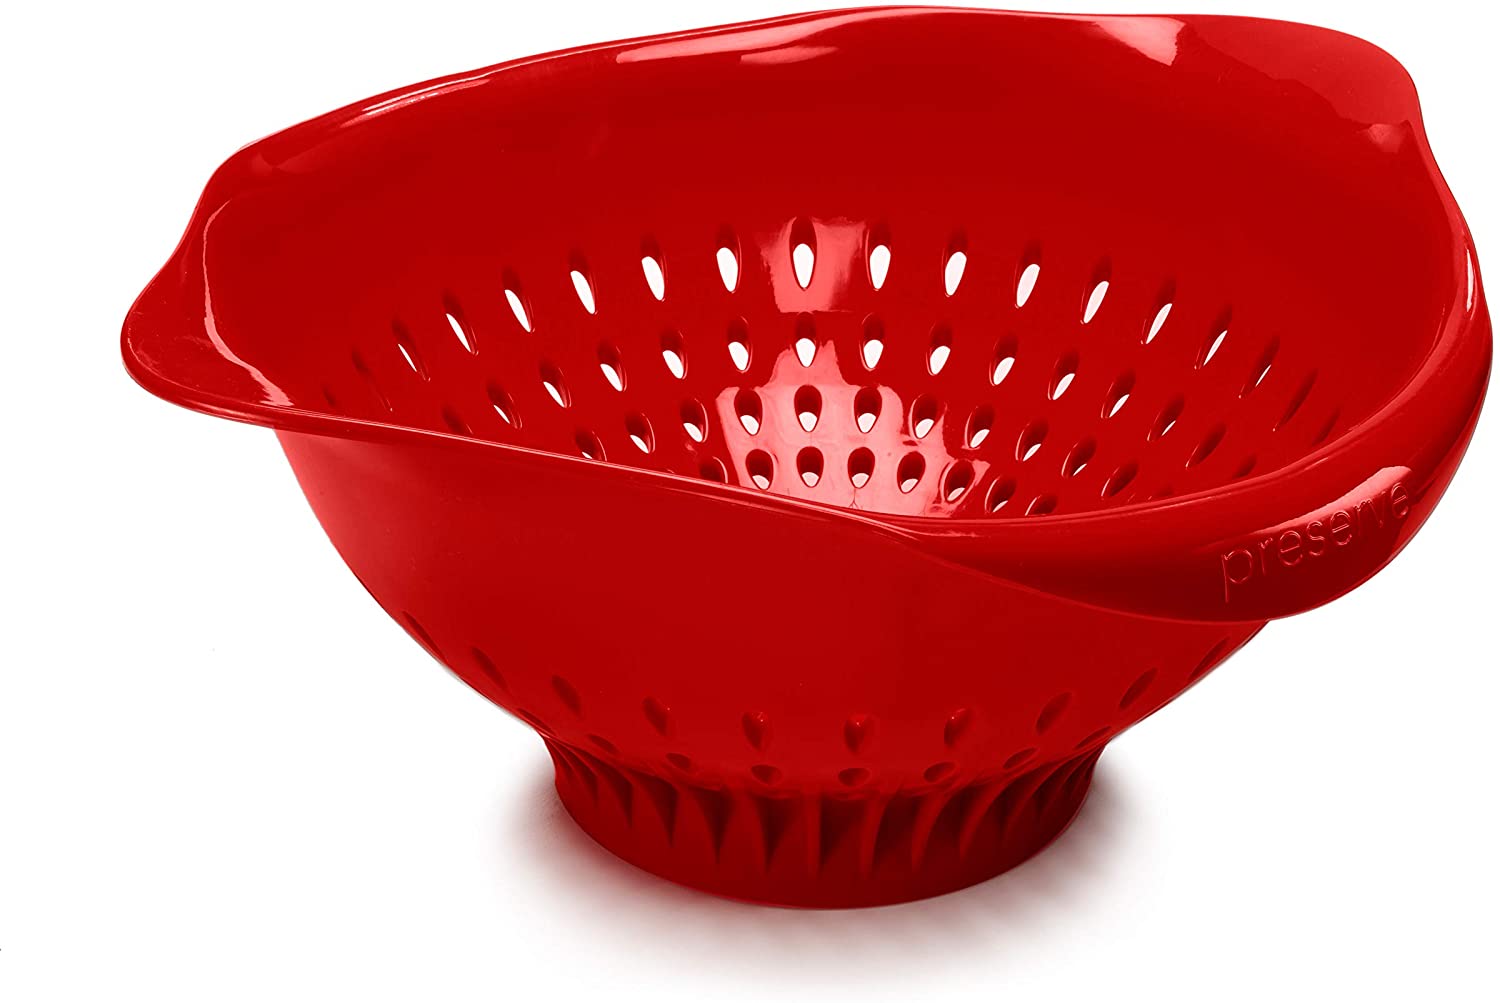 people doing dumb things - red Colander